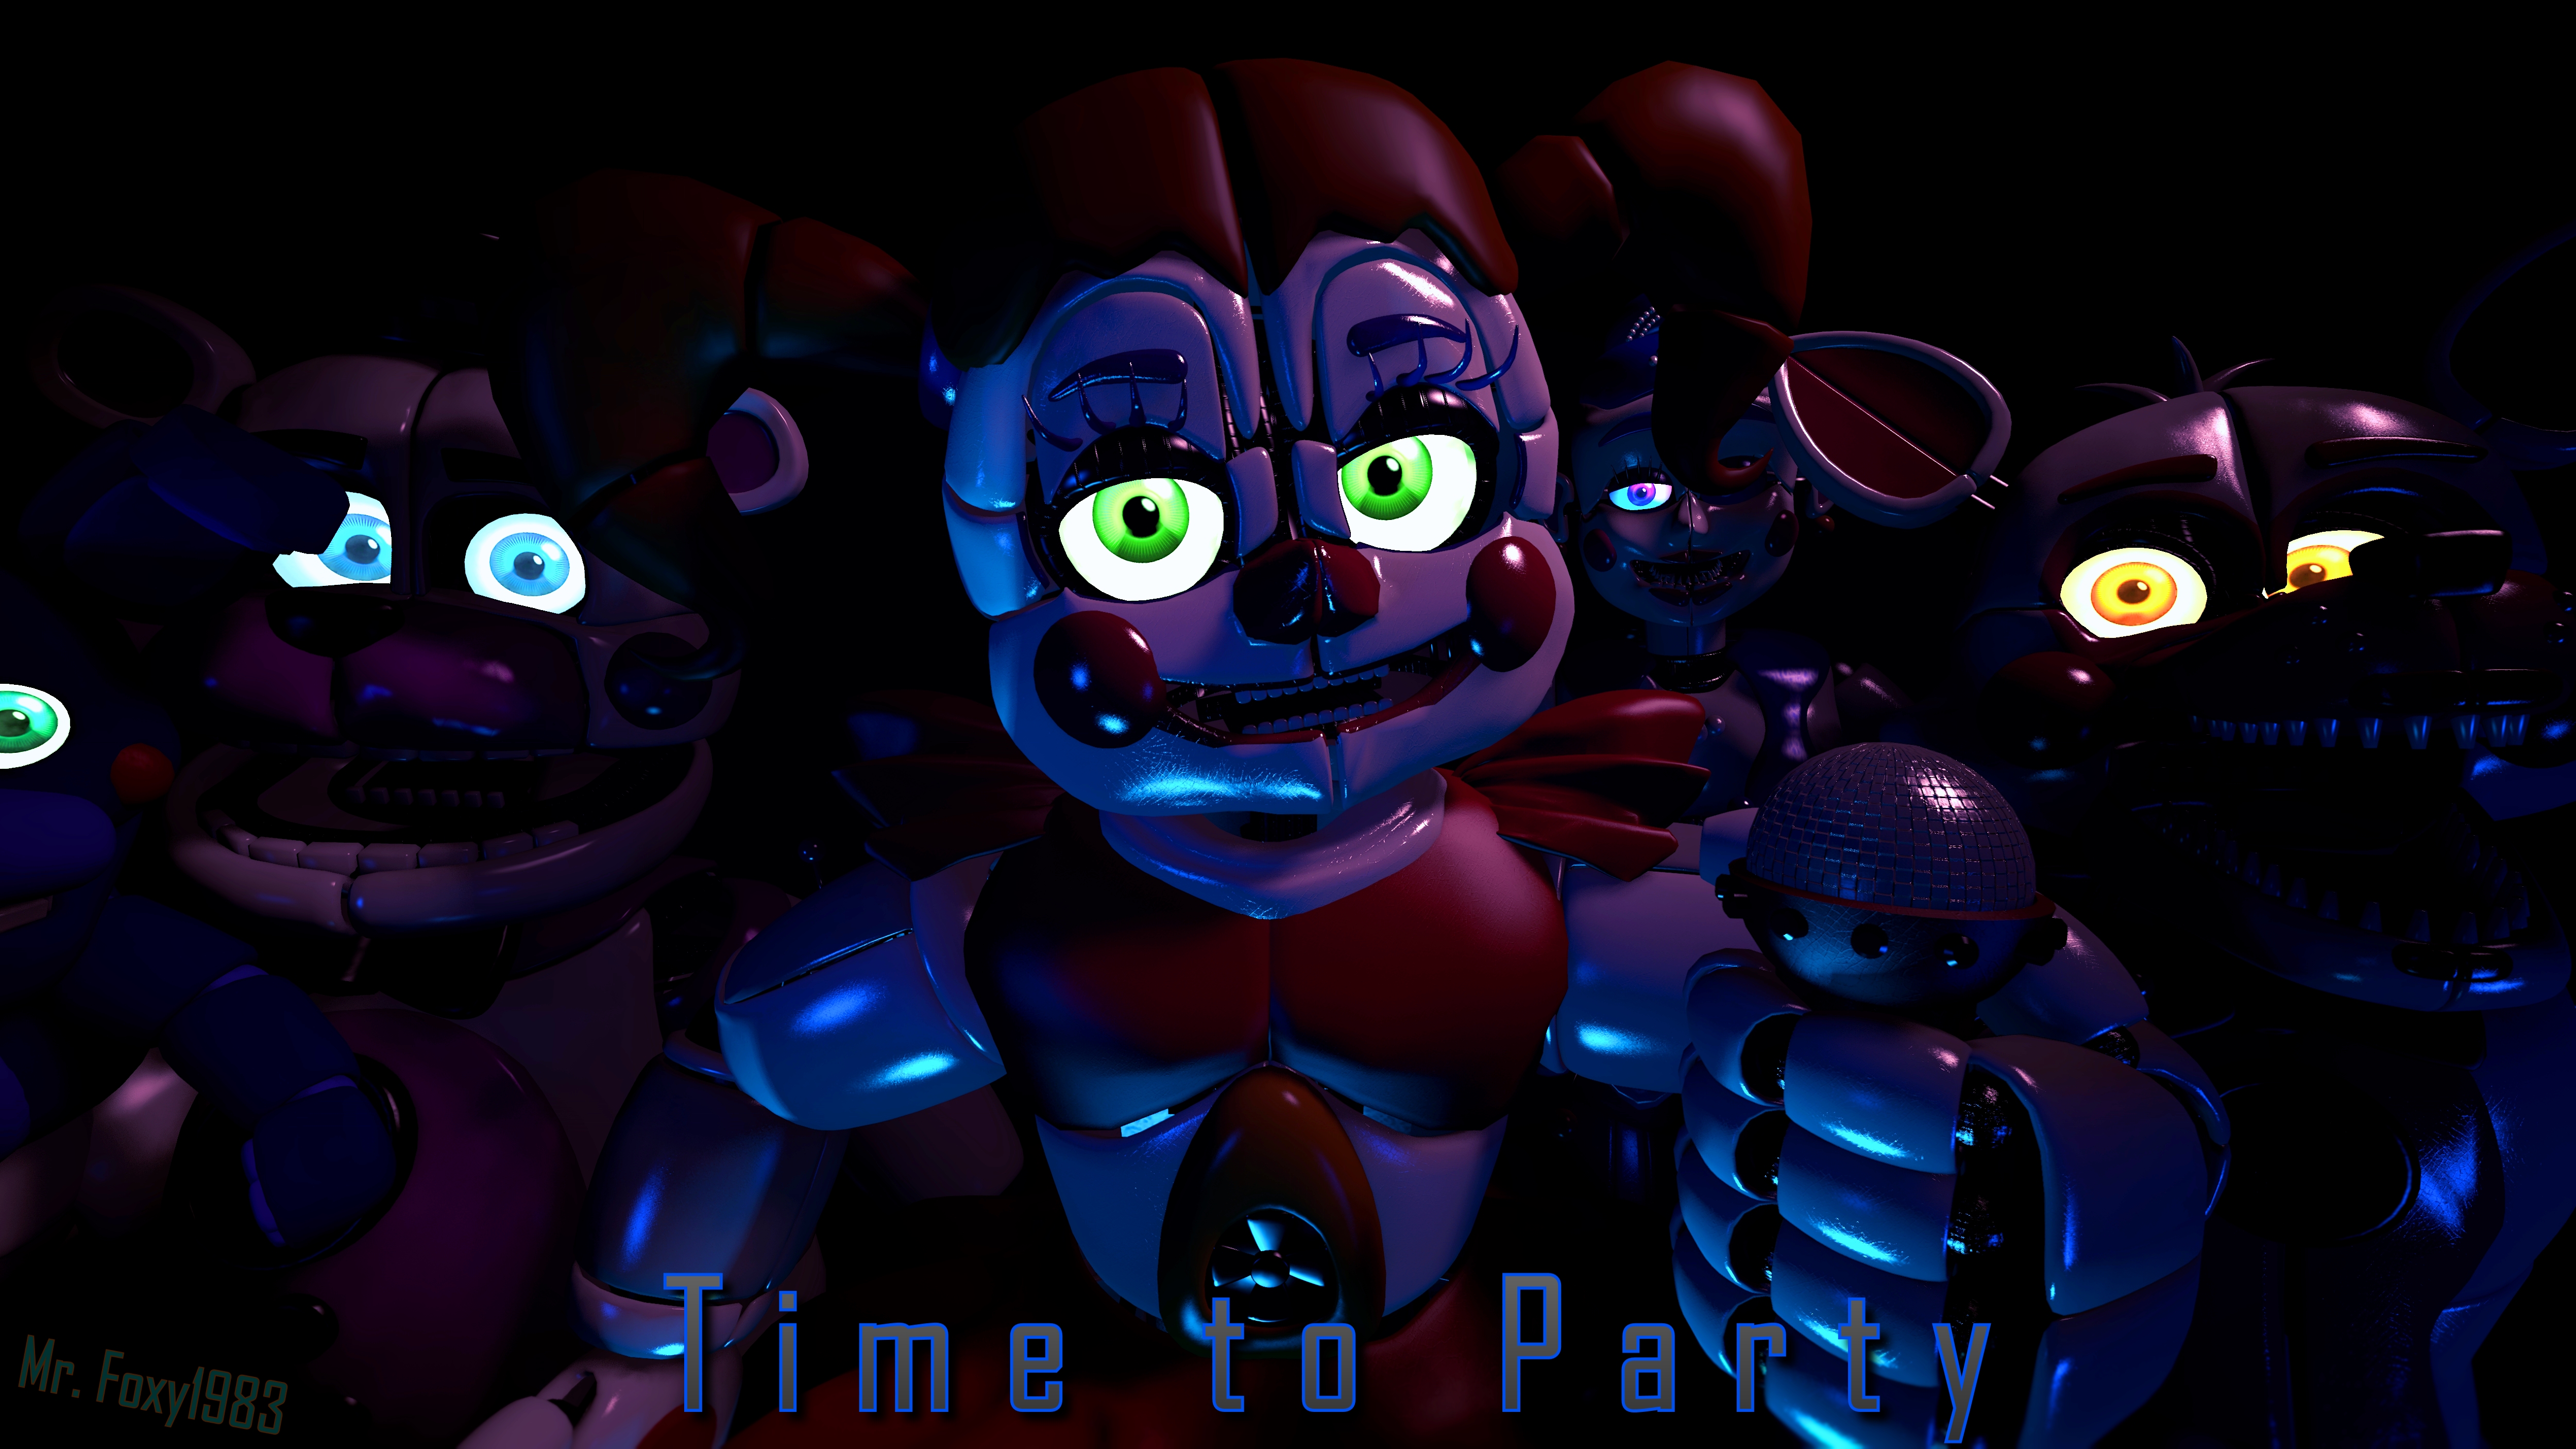 Five Nights At Freddys Sister Location wallpapers for desktop download  free Five Nights At Freddys Sister Location pictures and backgrounds for  PC  moborg